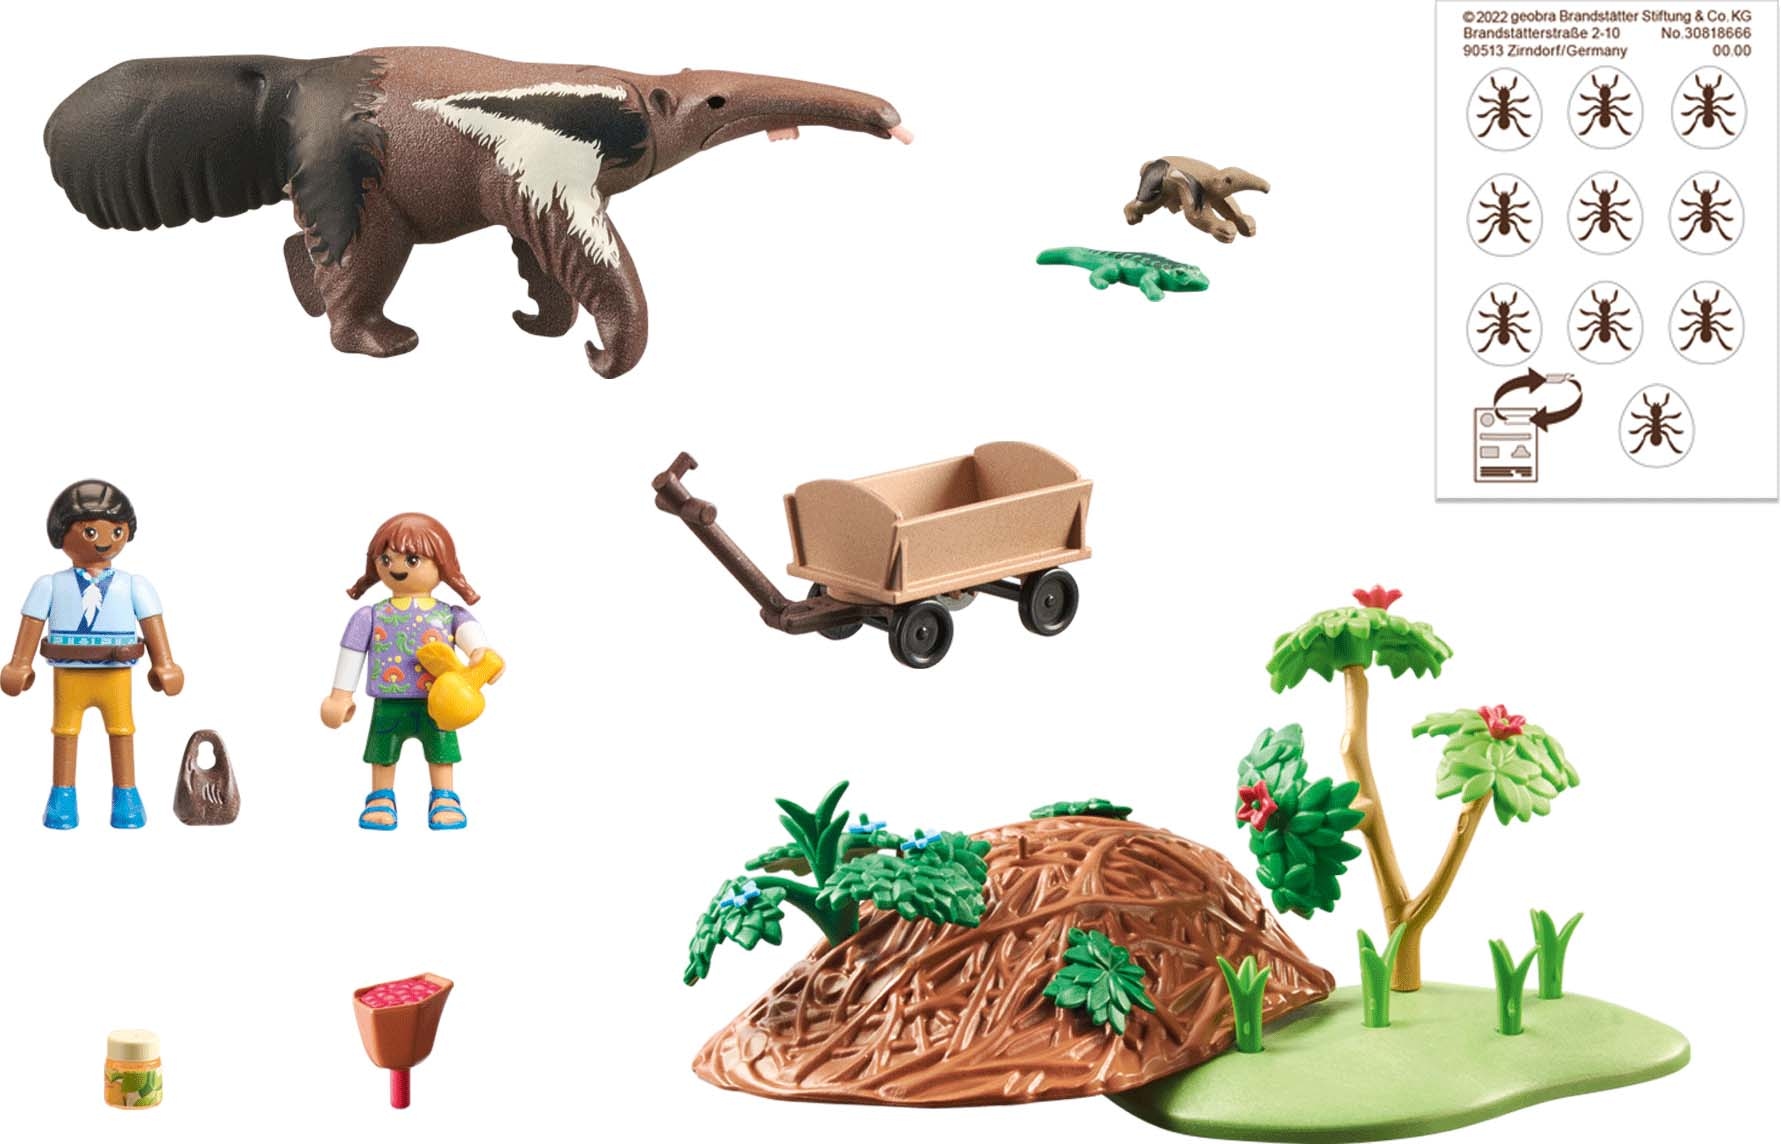 Playmobil® Konstruktions-Spielset »Wiltopia - Ameisenbärpflege (71012), Wiltopia«, (39 St.), teilweise aus recyceltem Material; Made in Germany